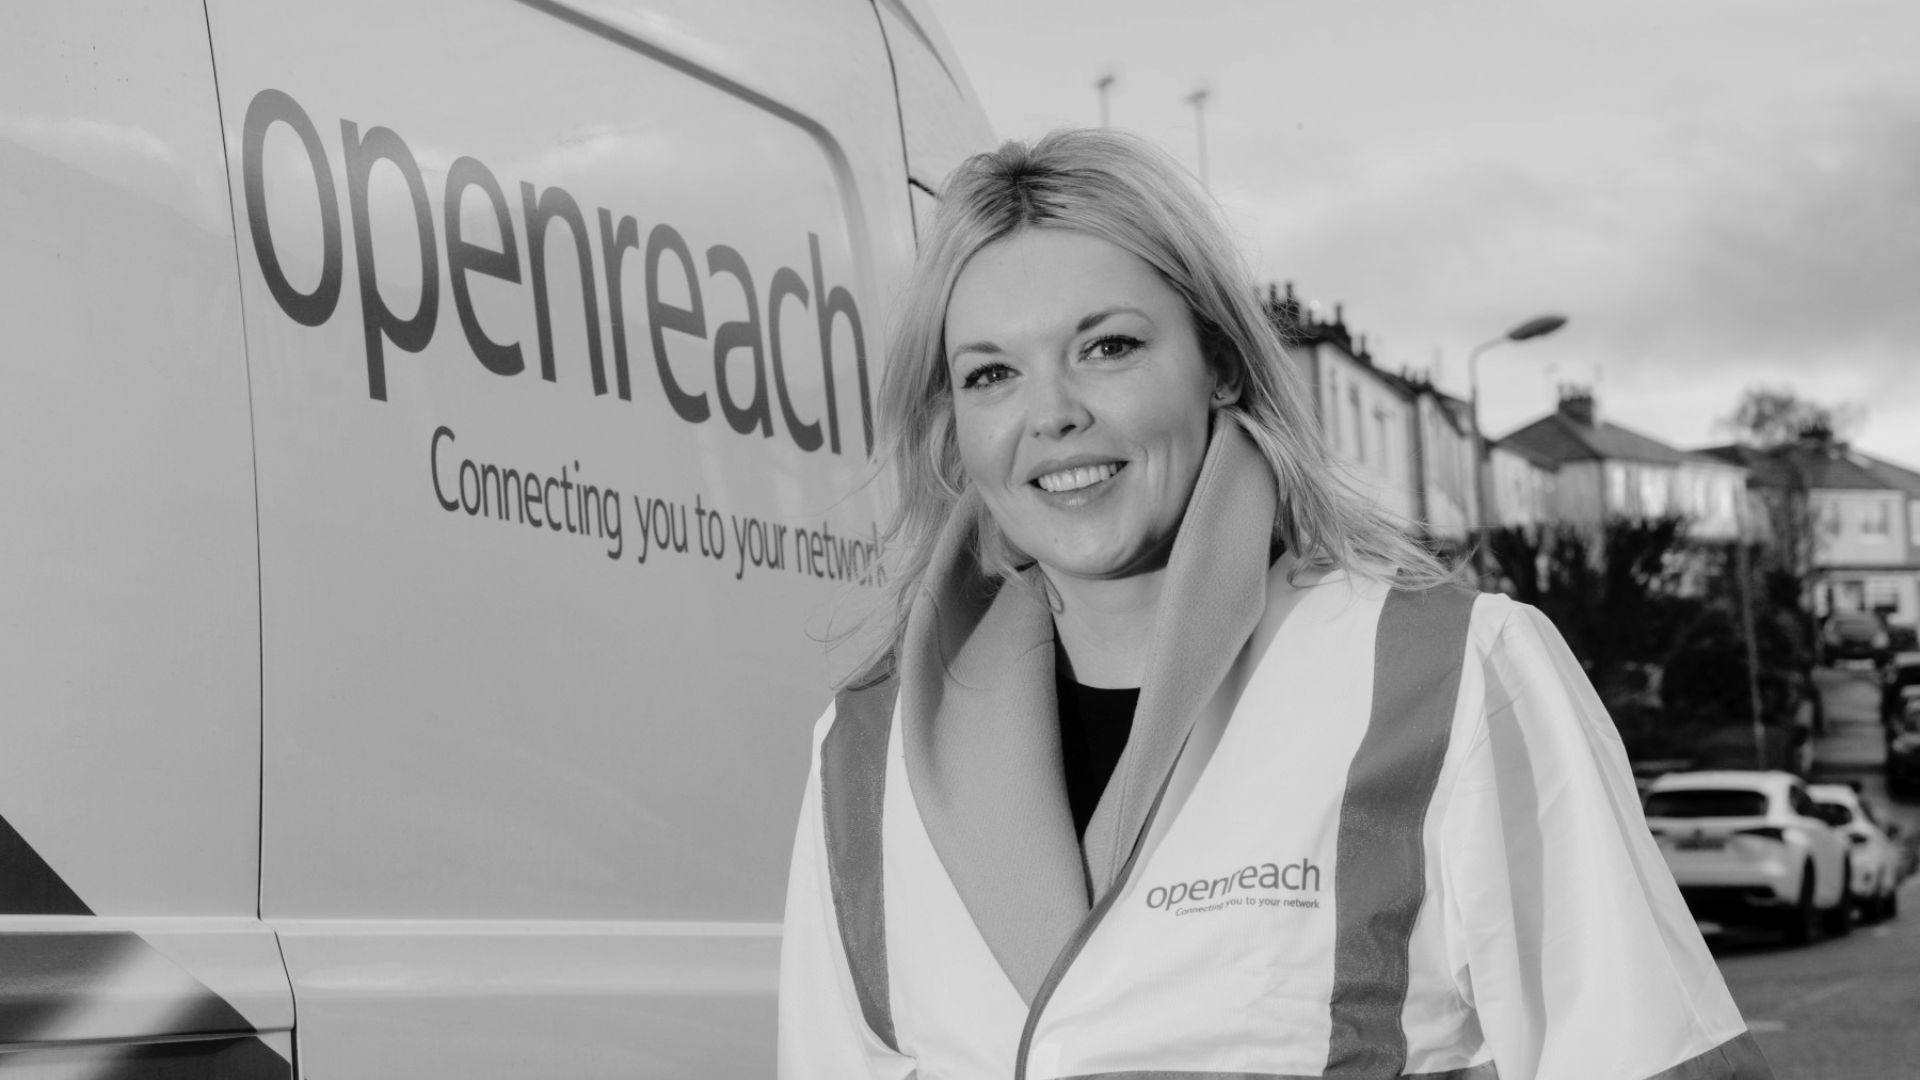 Openreach Expands Ultrafast Broadband Network to 800,000 Homes in Scotland